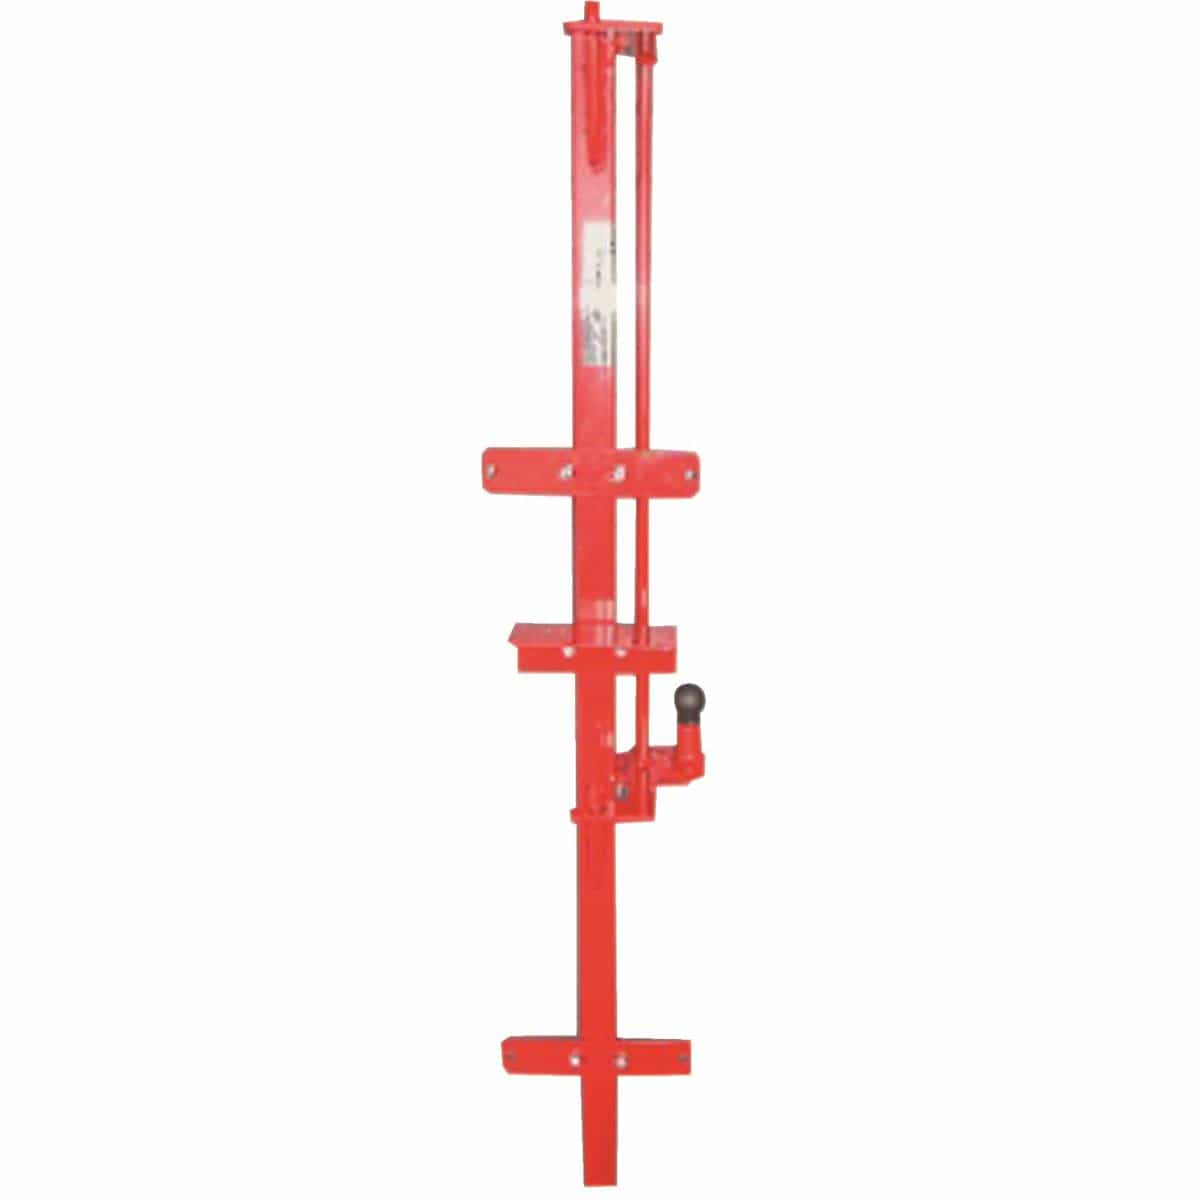 TrimmerTrap Double Backpack Blower Rack